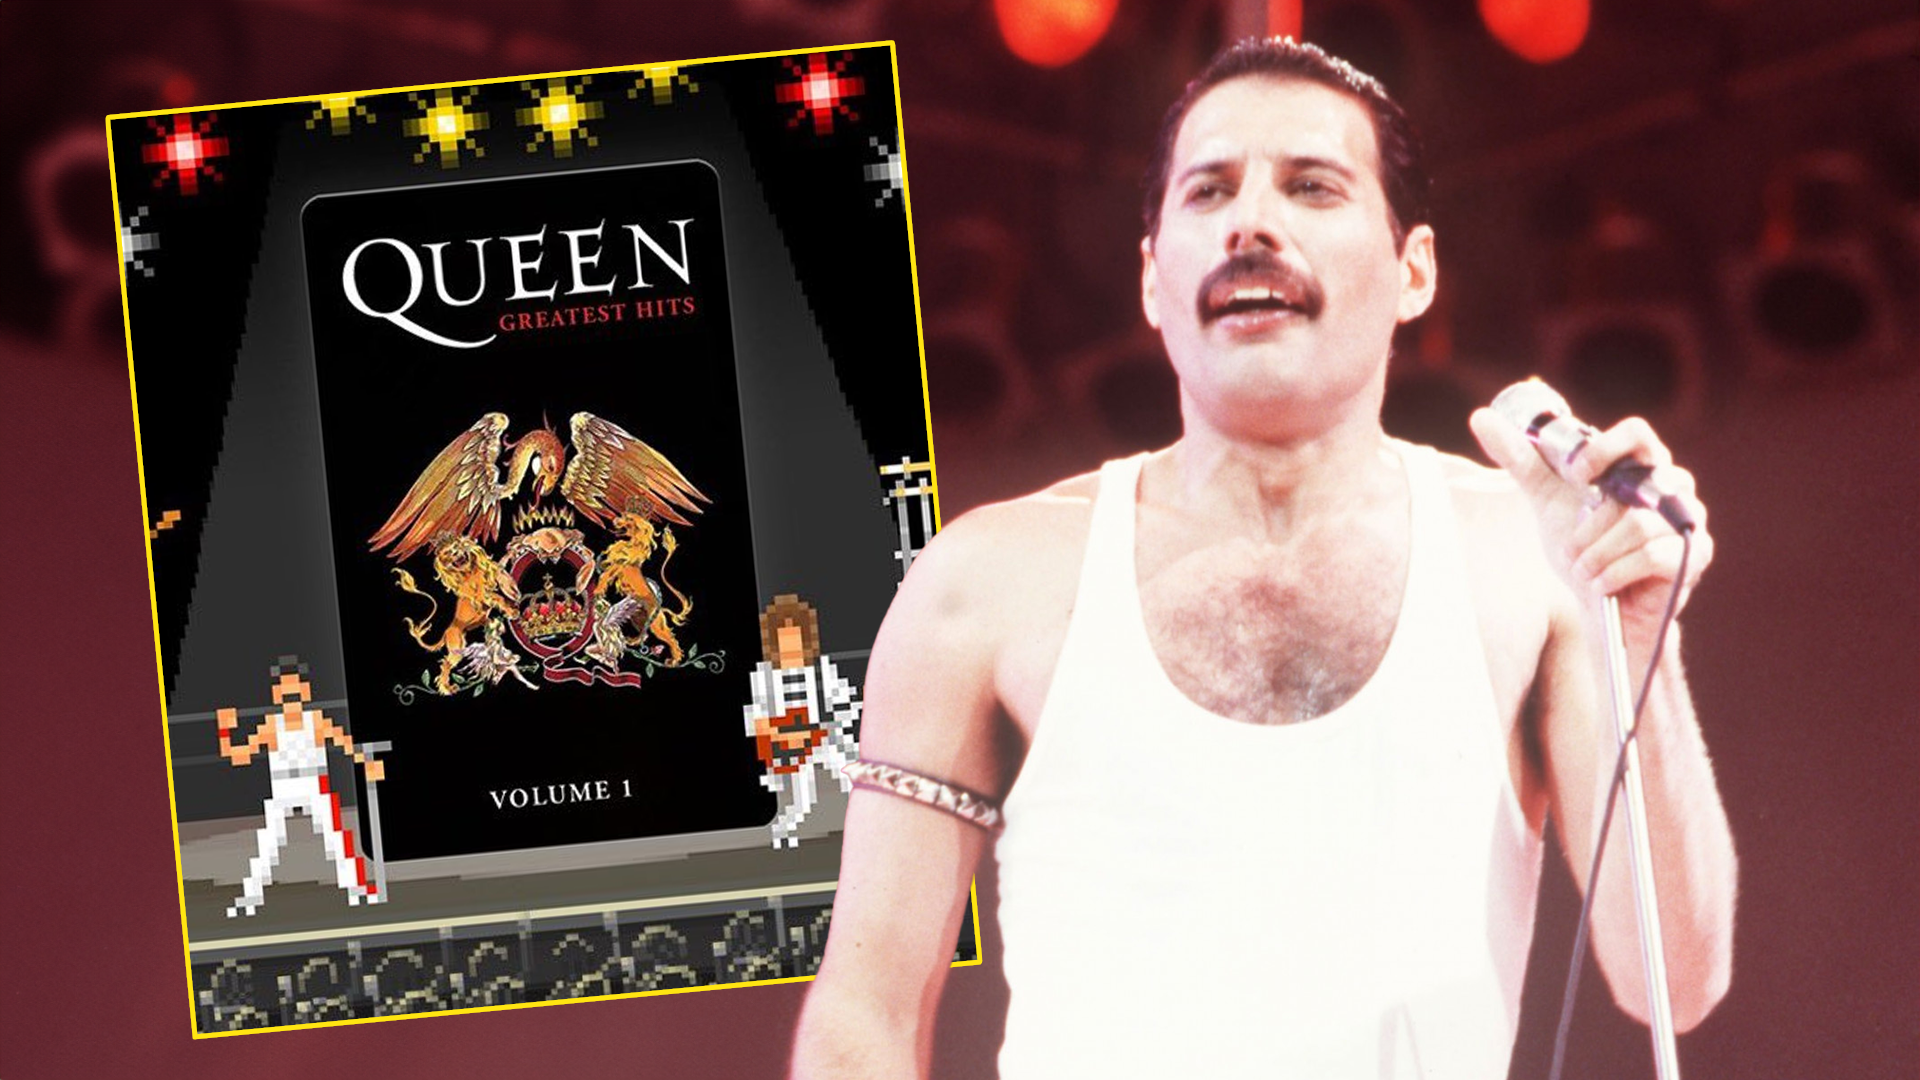 Classic Queen song 'Fat Bottomed Girls' removed from Greatest Hits album  for 'being too - LBC